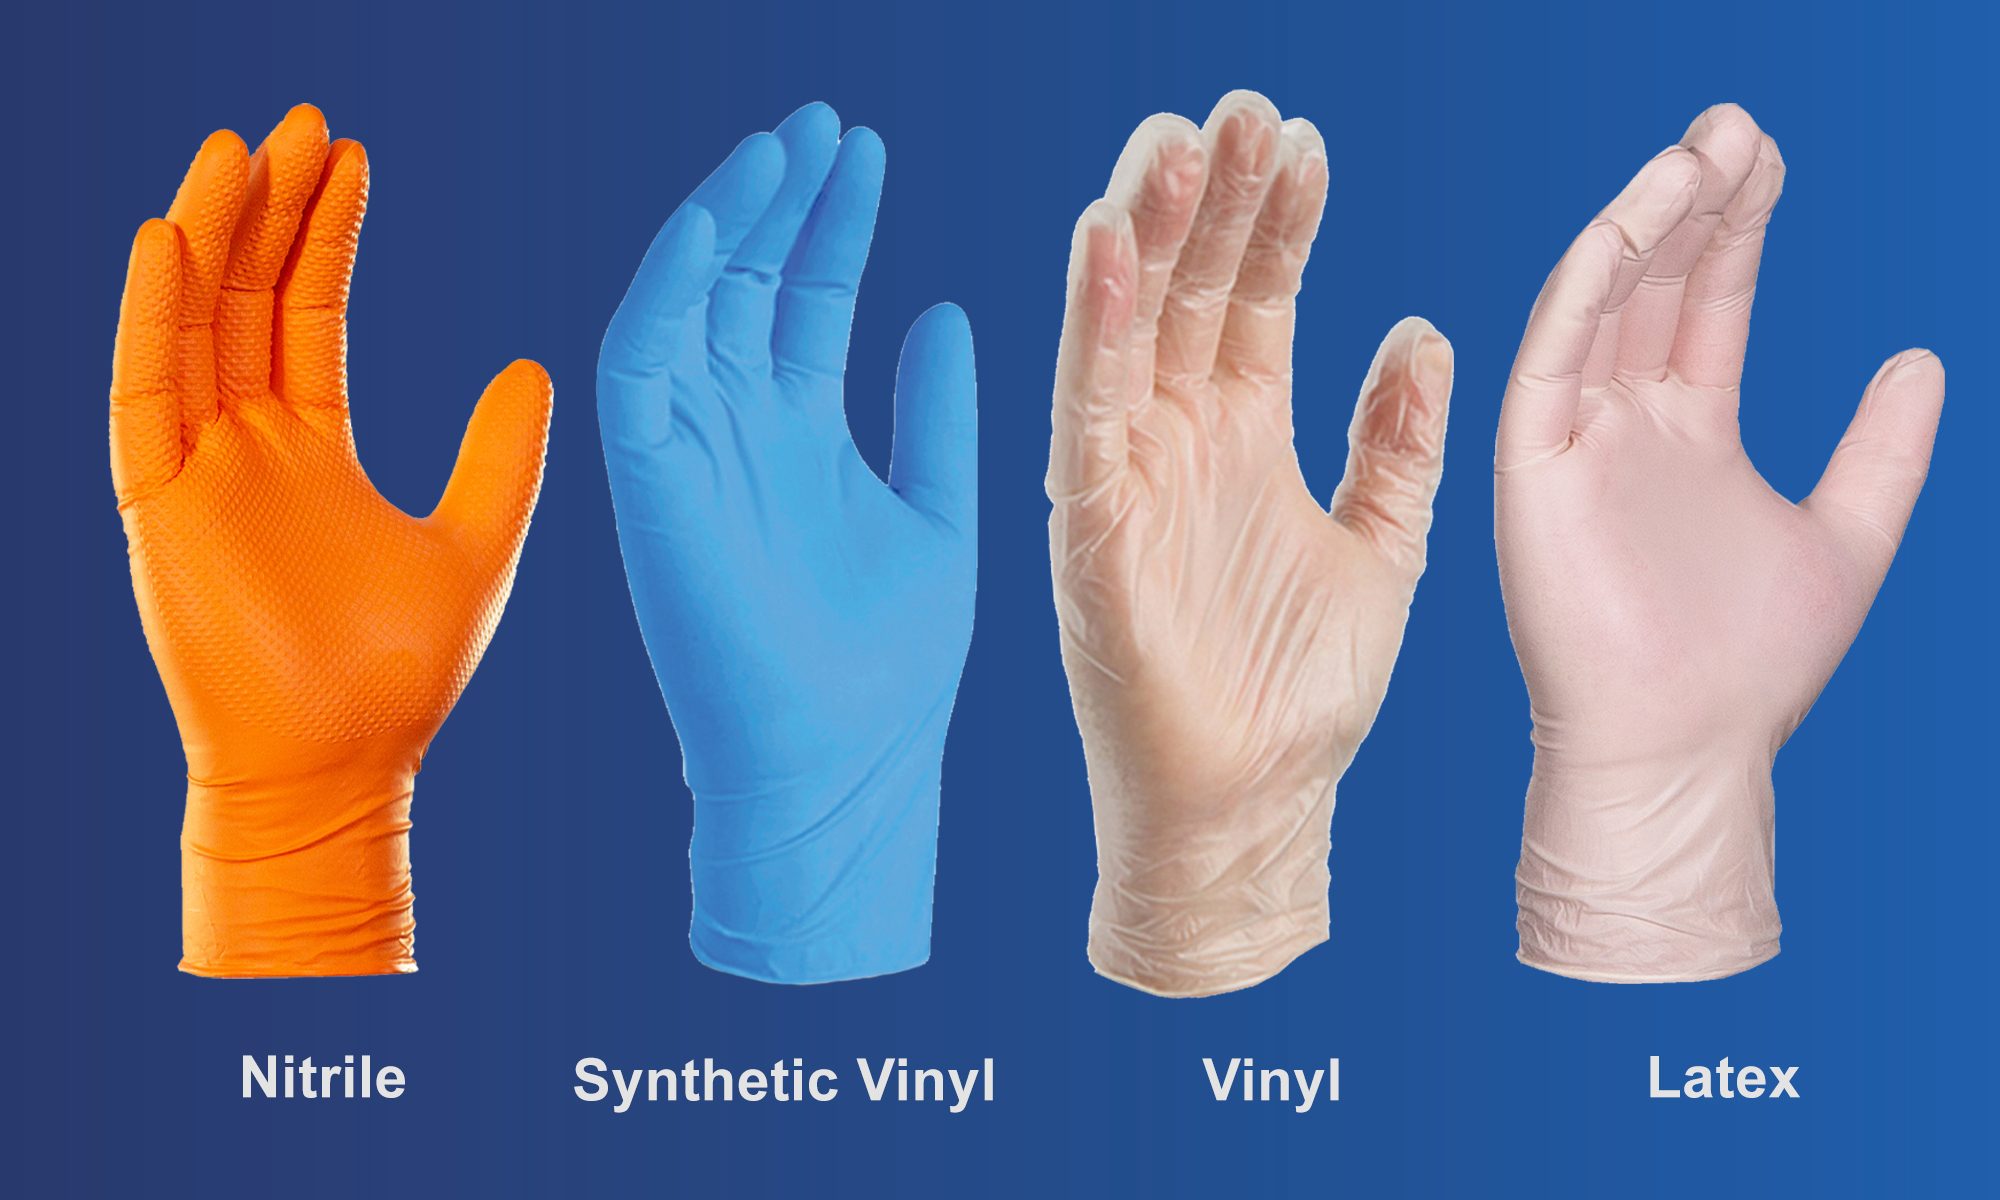 Nitrile, synthetic hybrid, vinyl, or latex: Which glove is right for your customer?